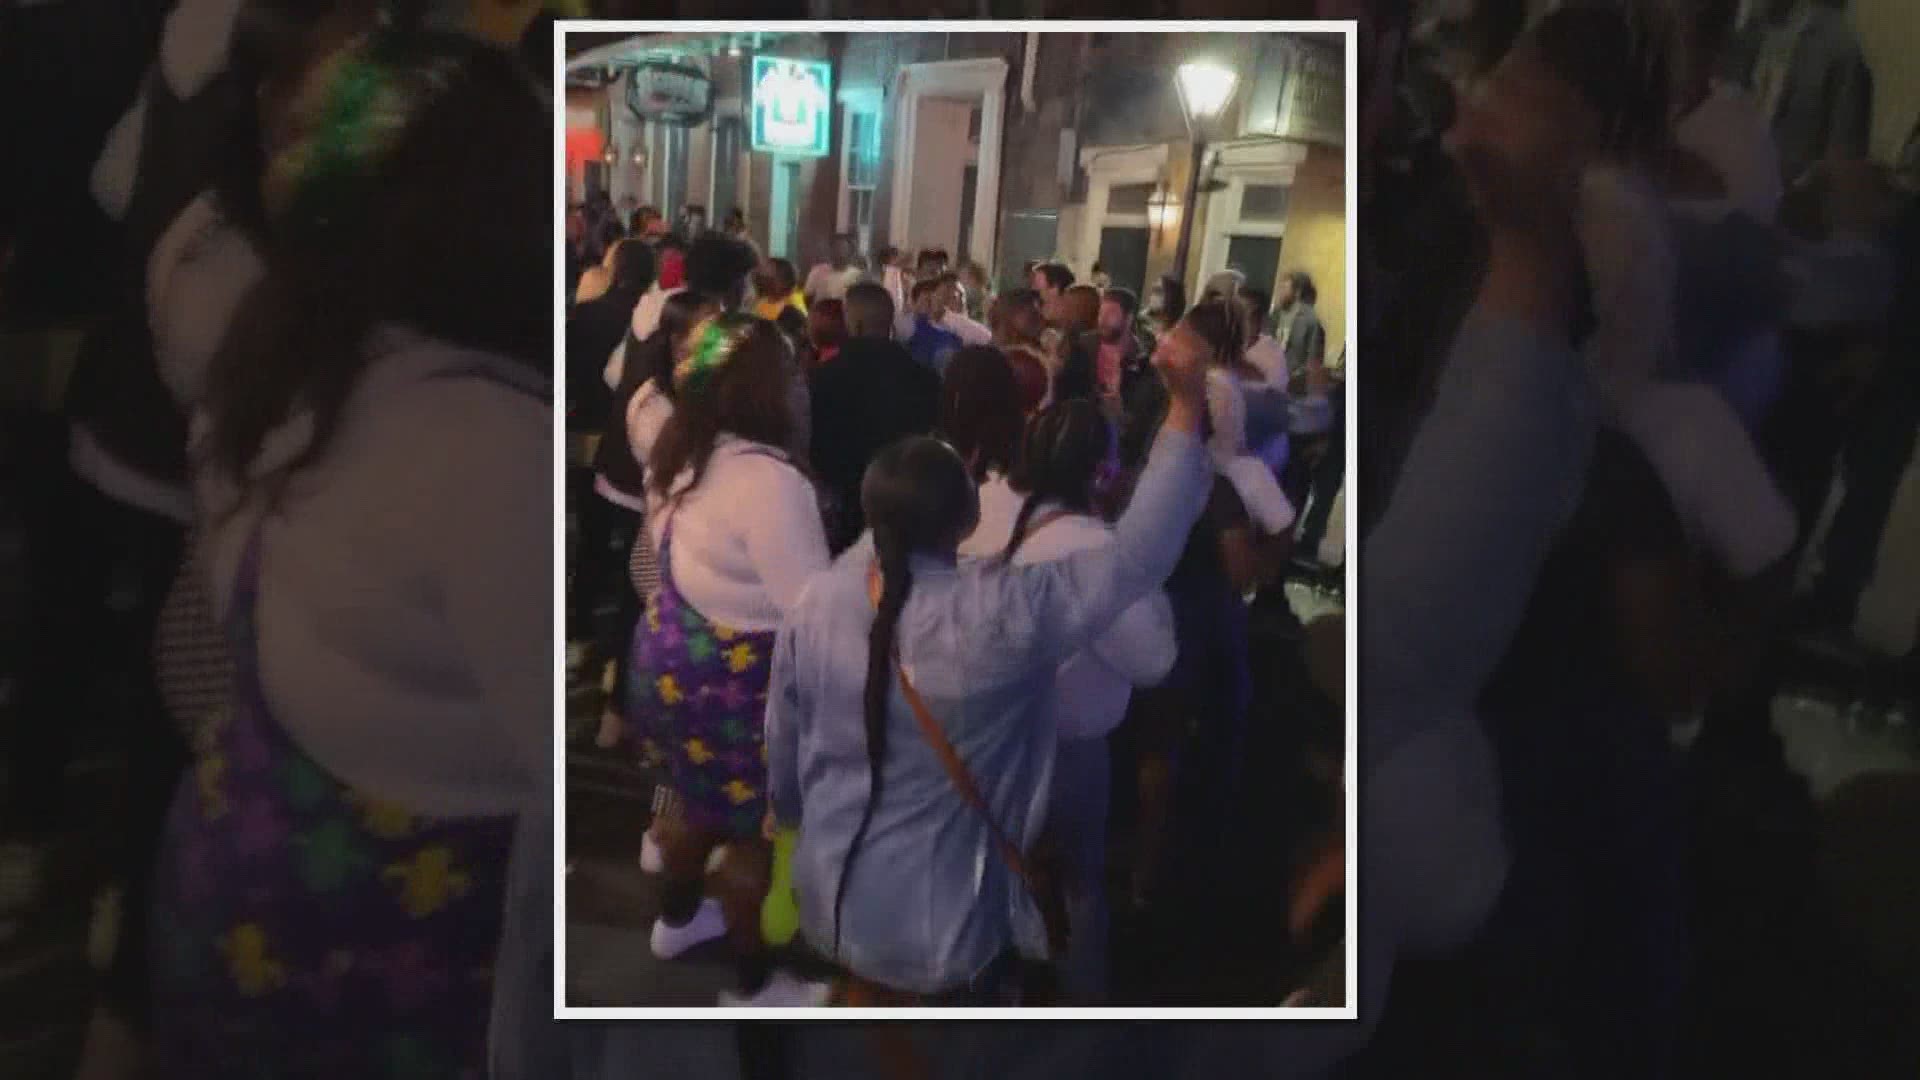 New Orleans preps for Mardi Gras, Mayor Cantrell expected to announce new restrictions